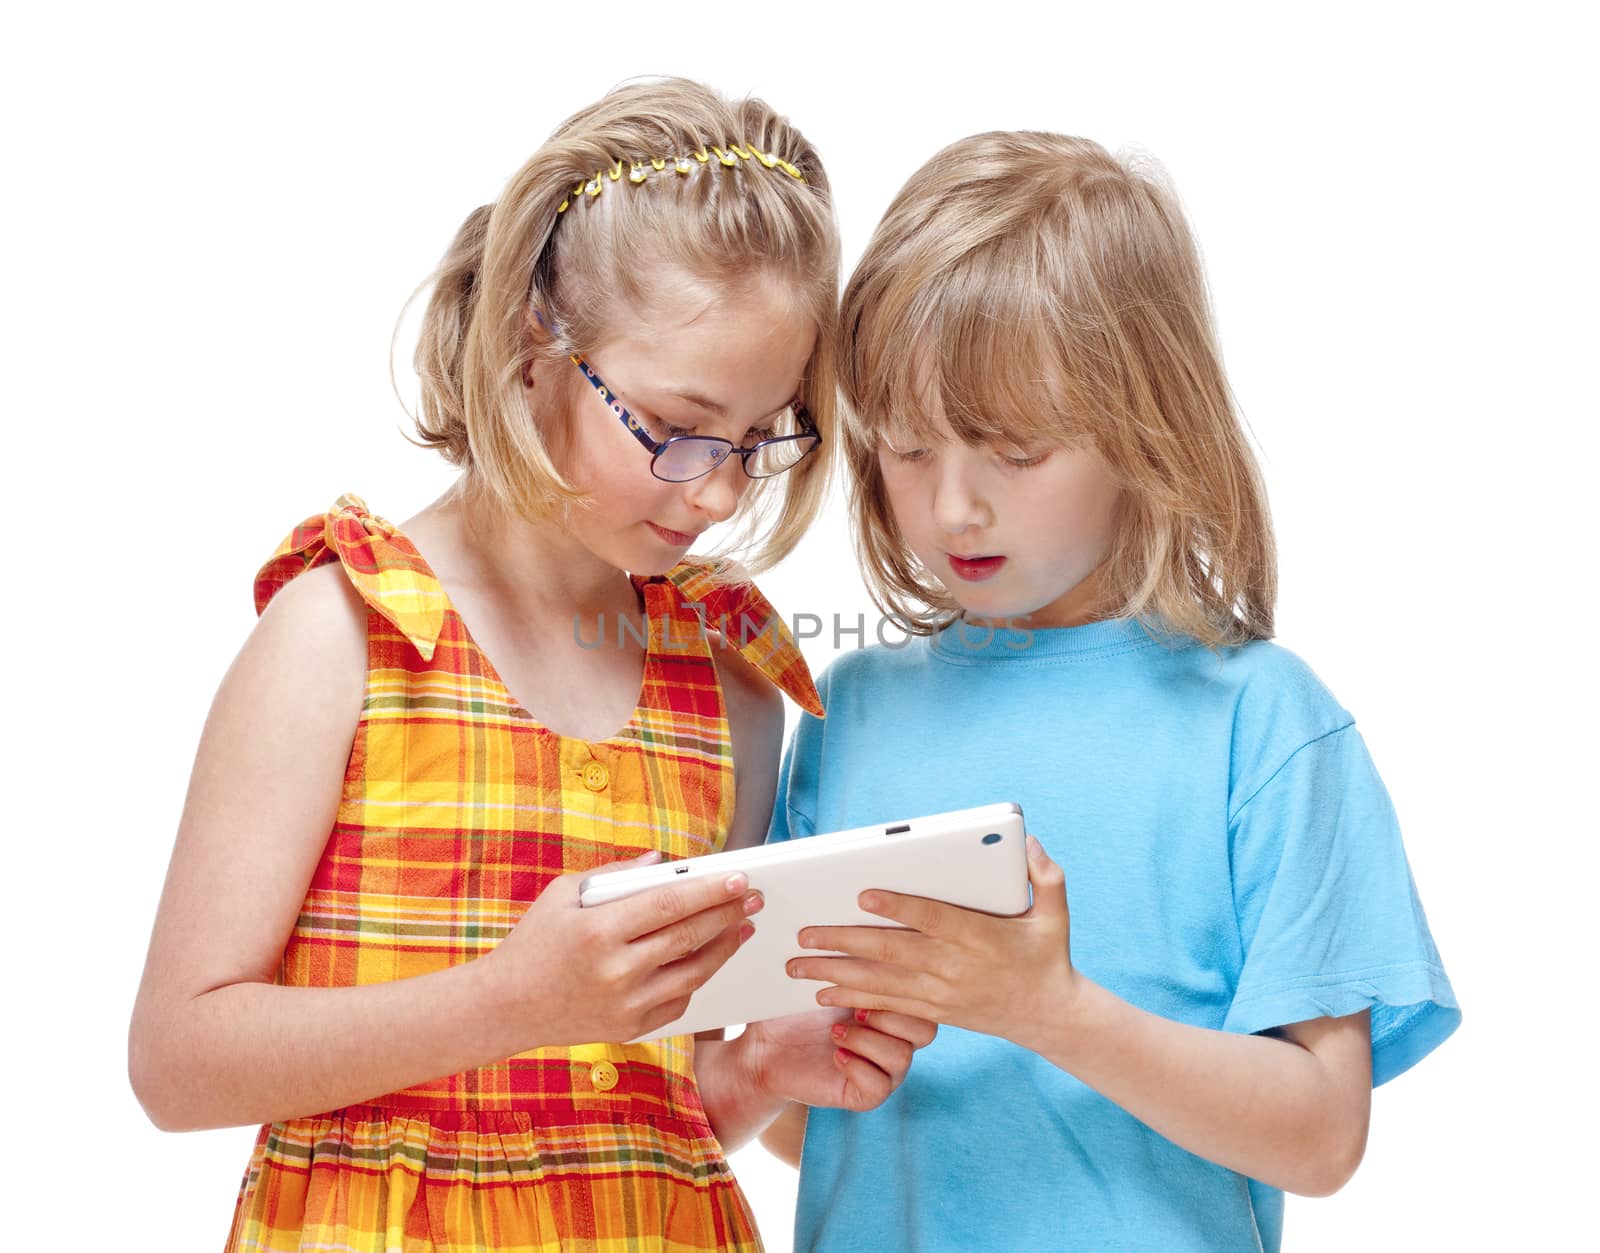 Two Children Having Fun with Digital Tablet by courtyardpix